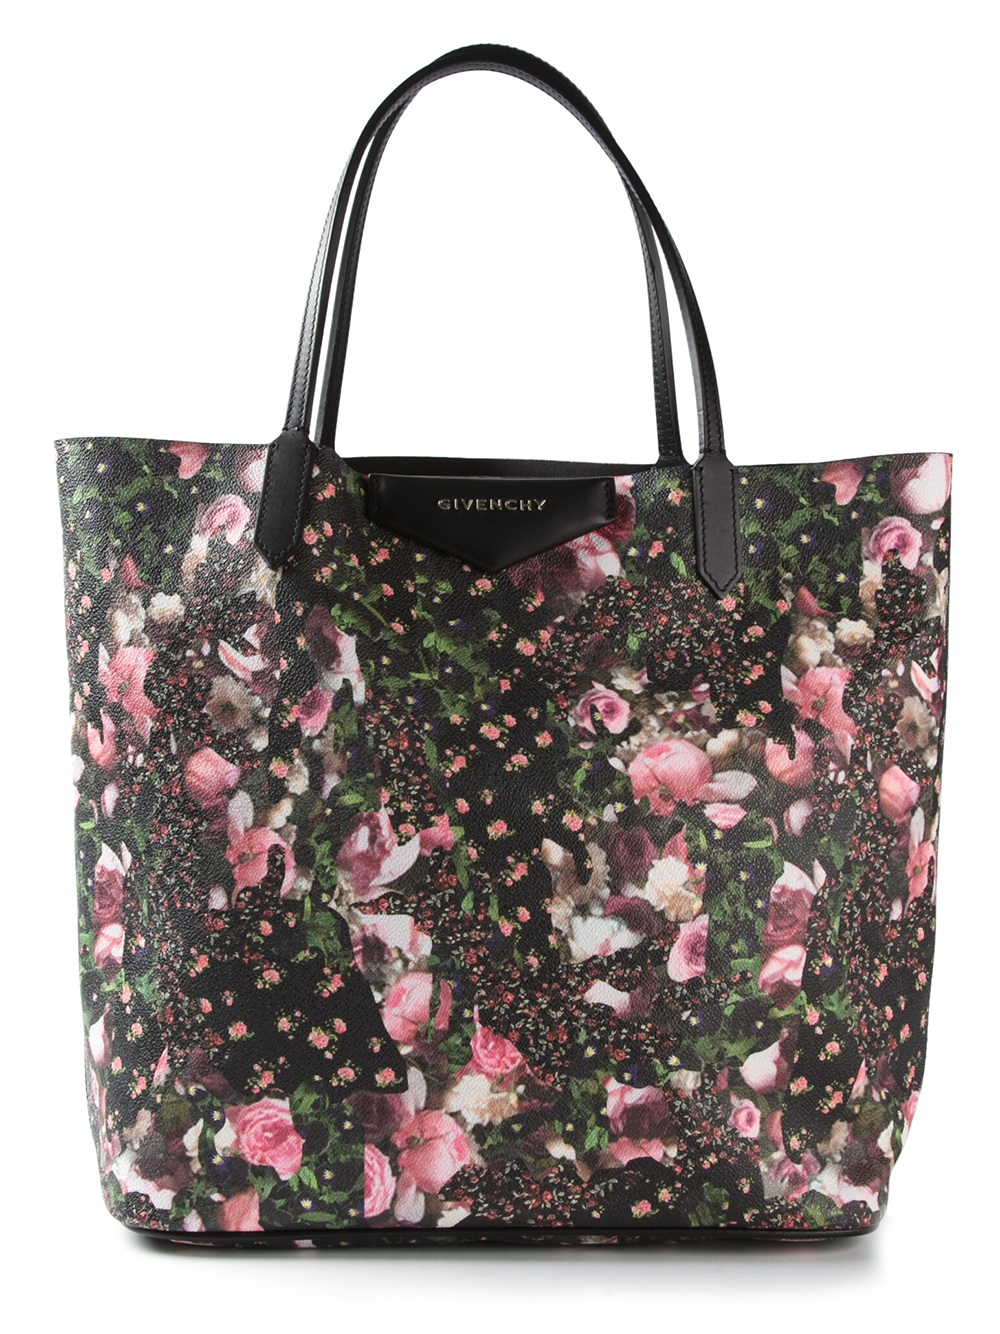 Givenchy Floral Bags & Handbags for Women, Authenticity Guaranteed